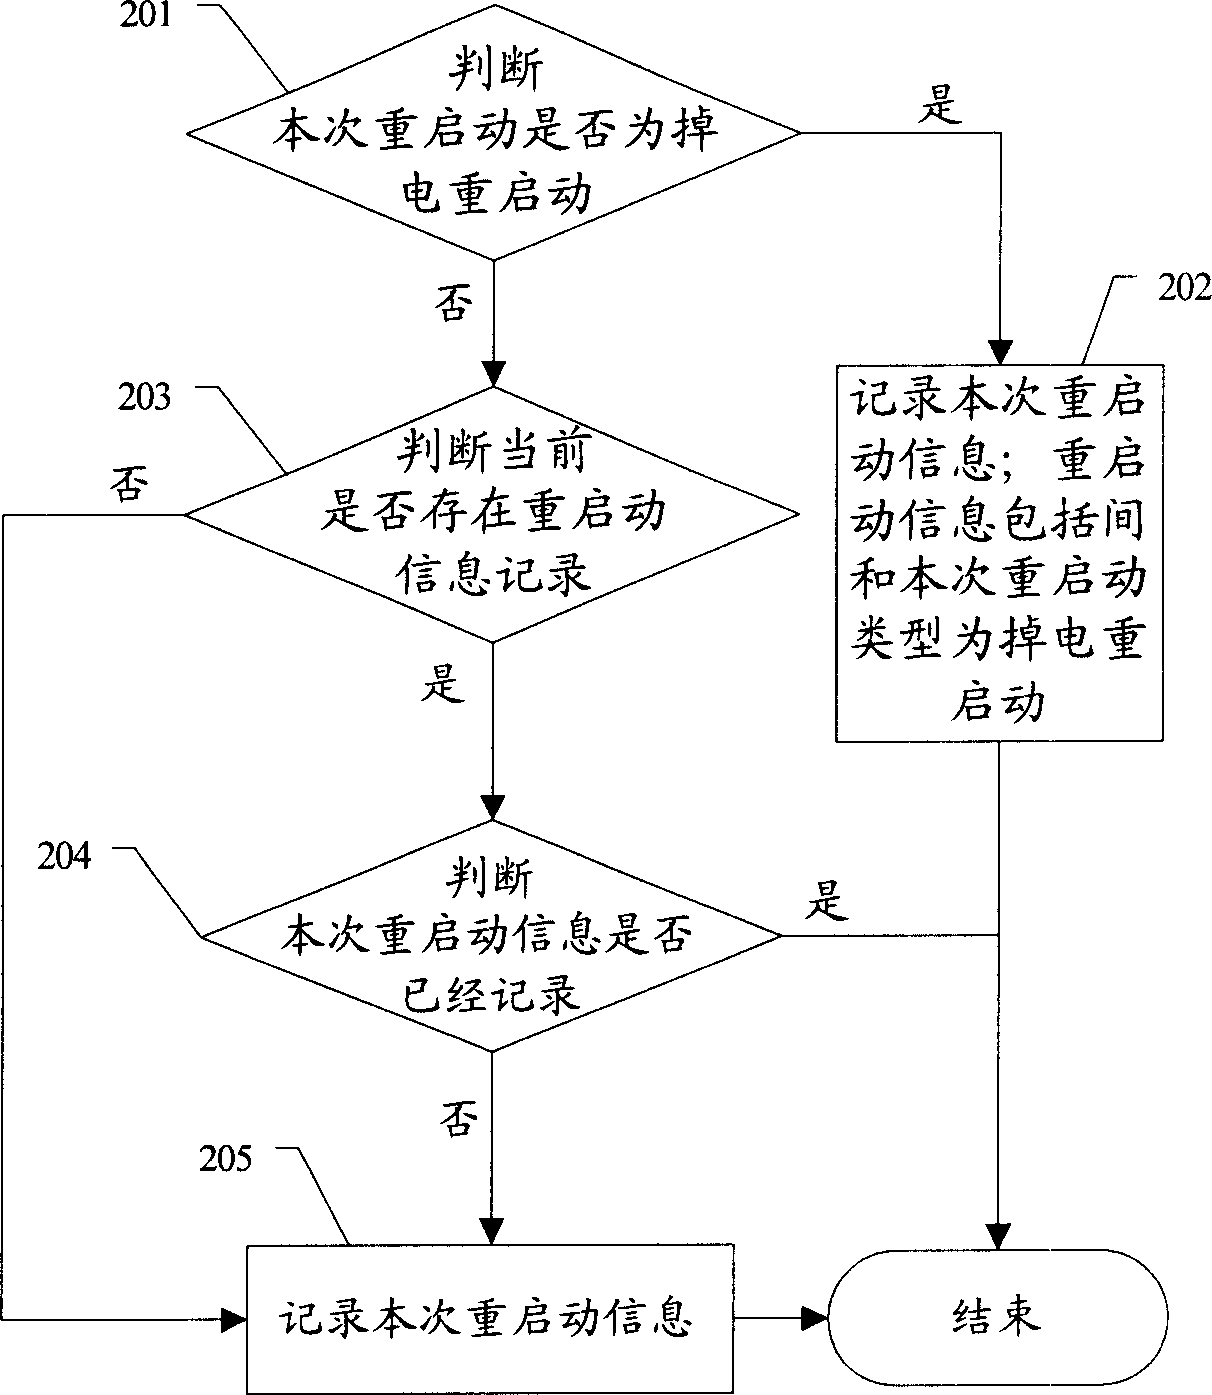 Method and device of restart information recording